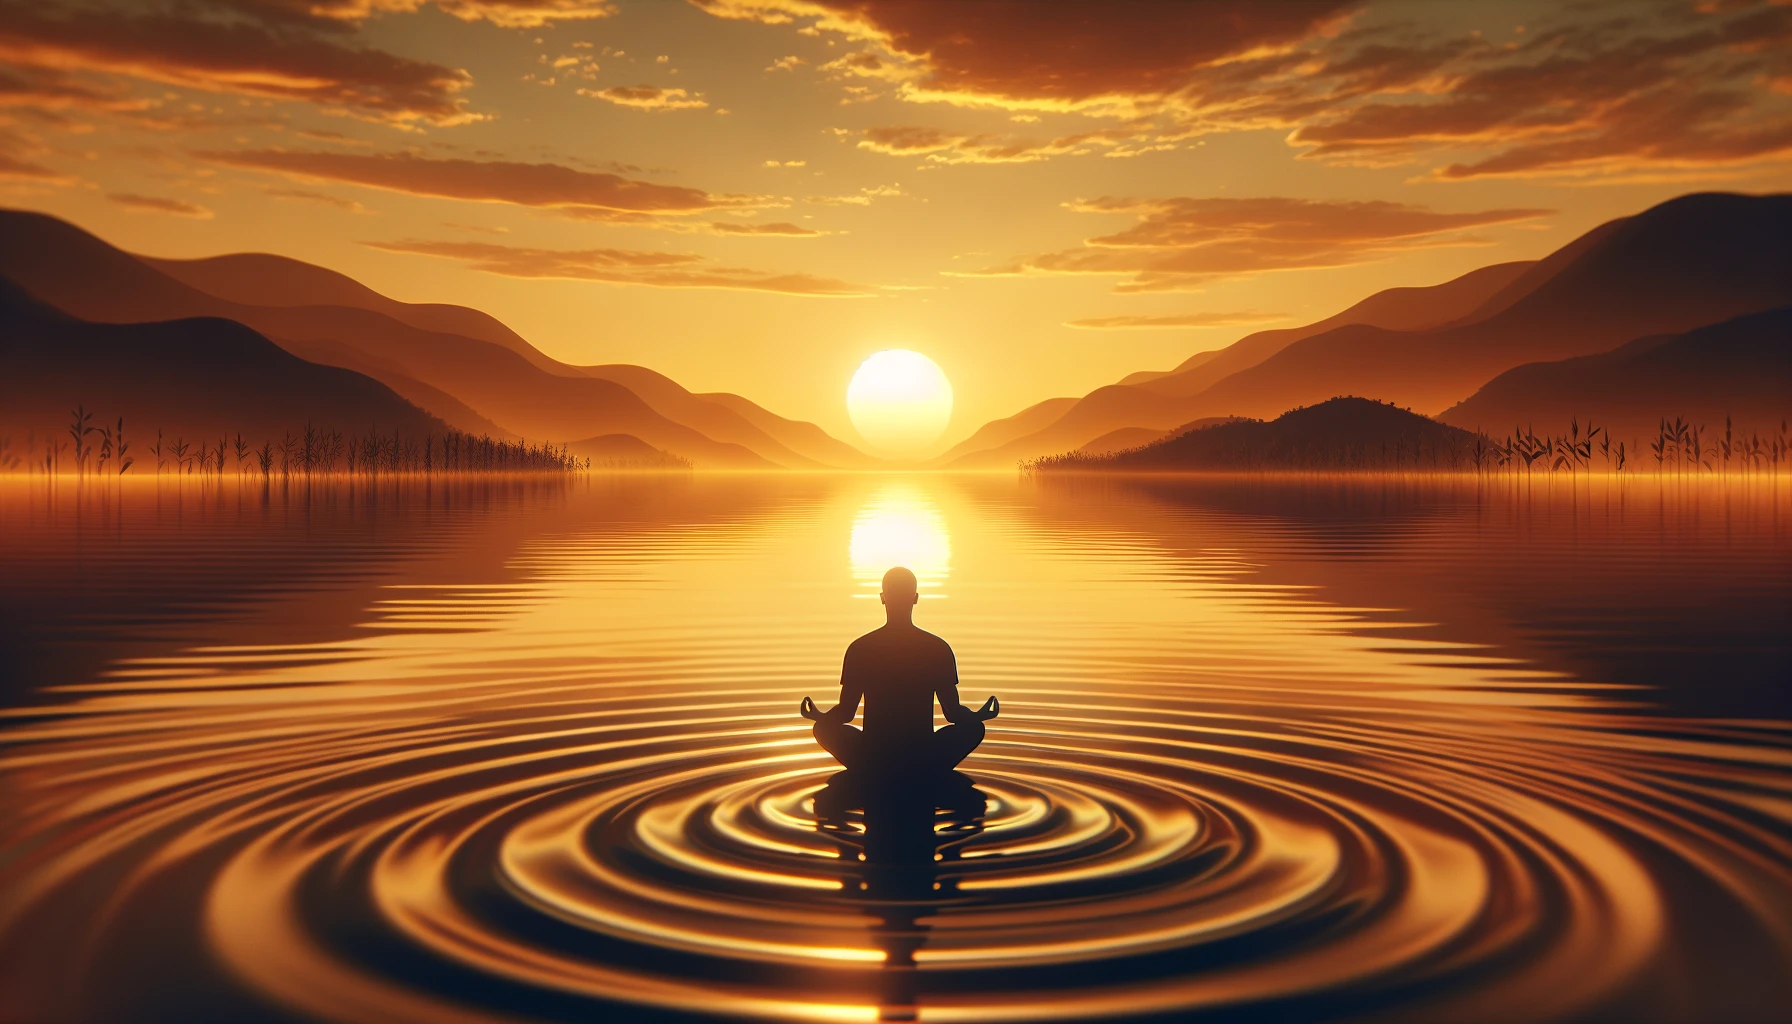 A person meditating by a calm lake at sunset, surrounded by warm, golden light and tranquil water.